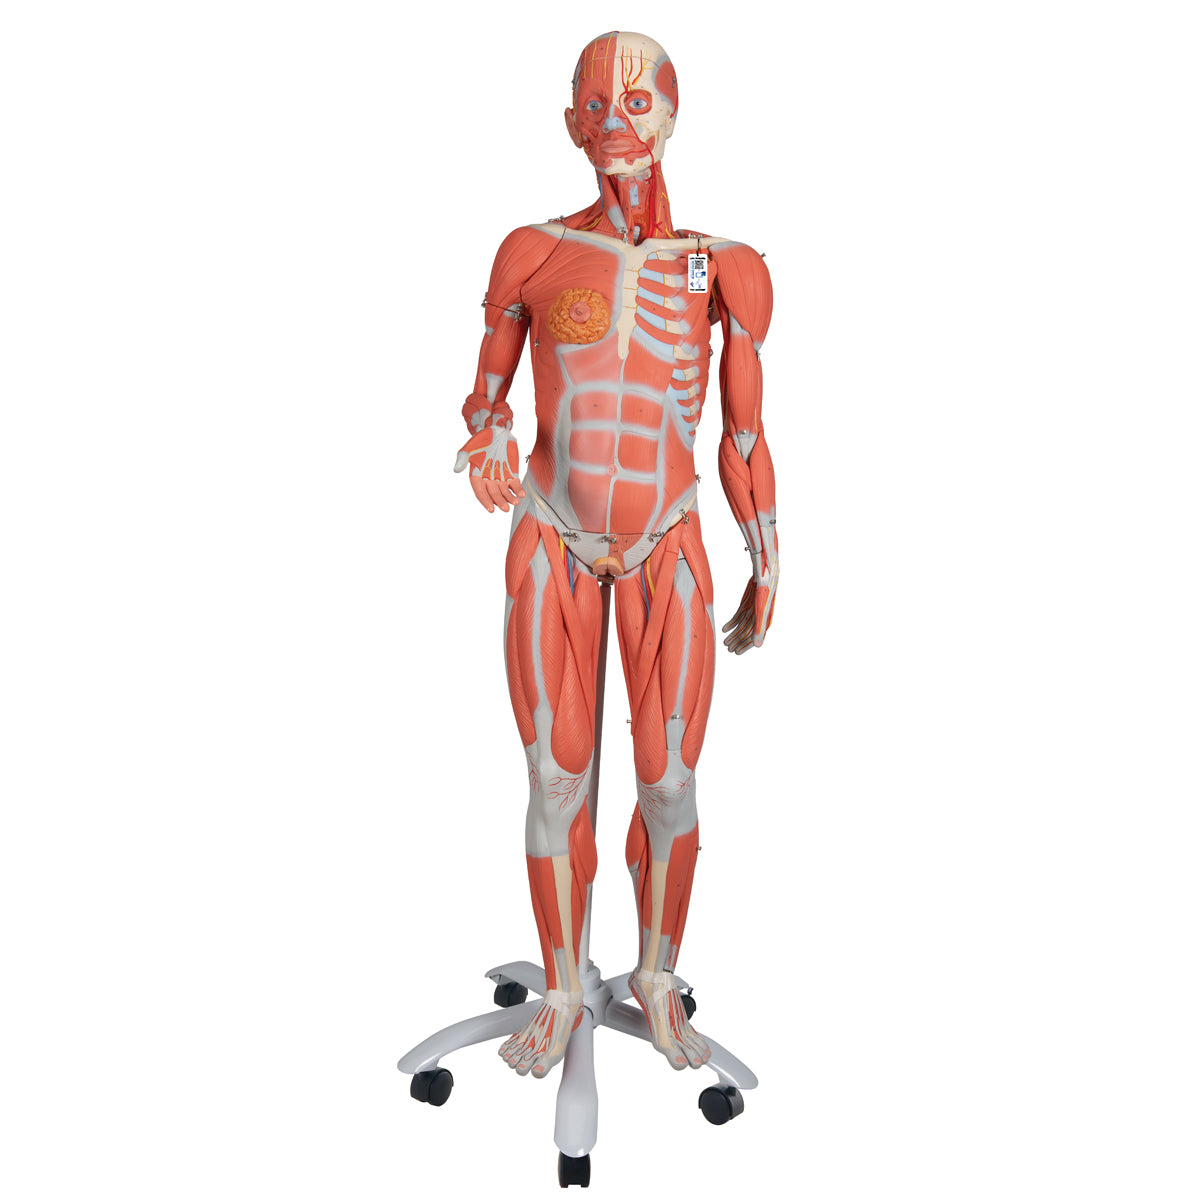 Muscle model in reduced size